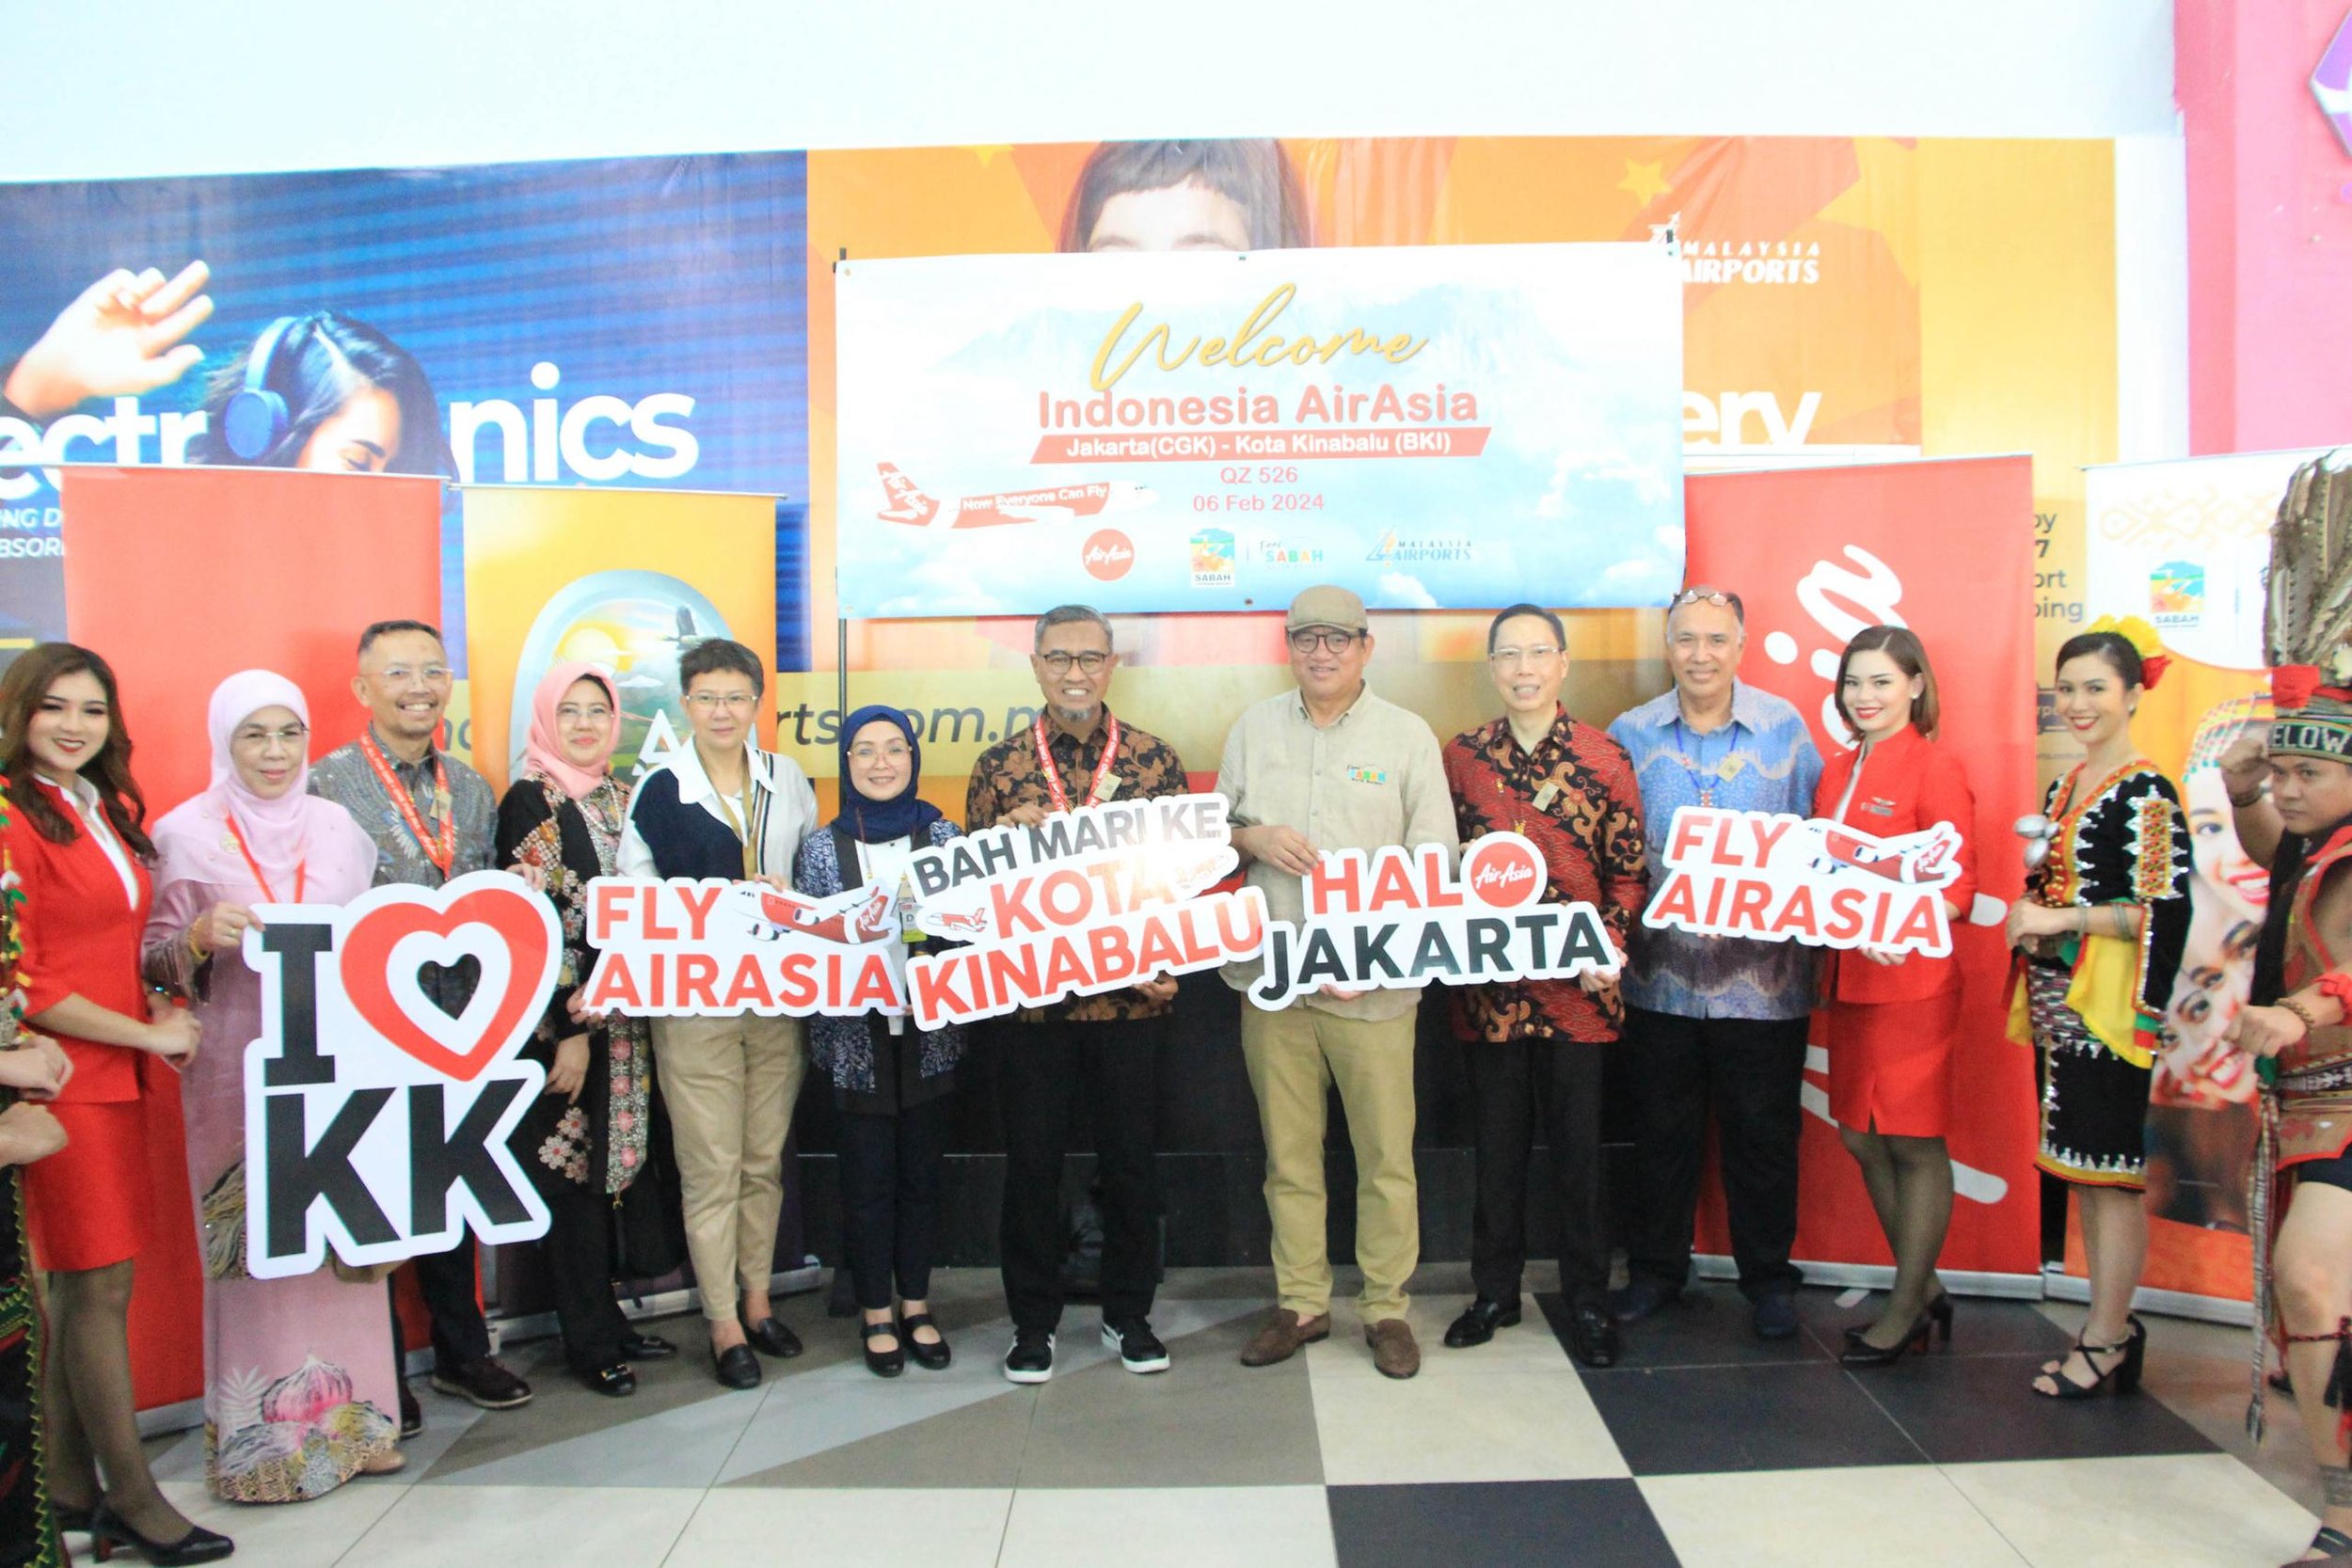 Indonesia AirAsia Offers Direct Flights from Jakarta to Kota Kinabalu, The First International Route in 2024